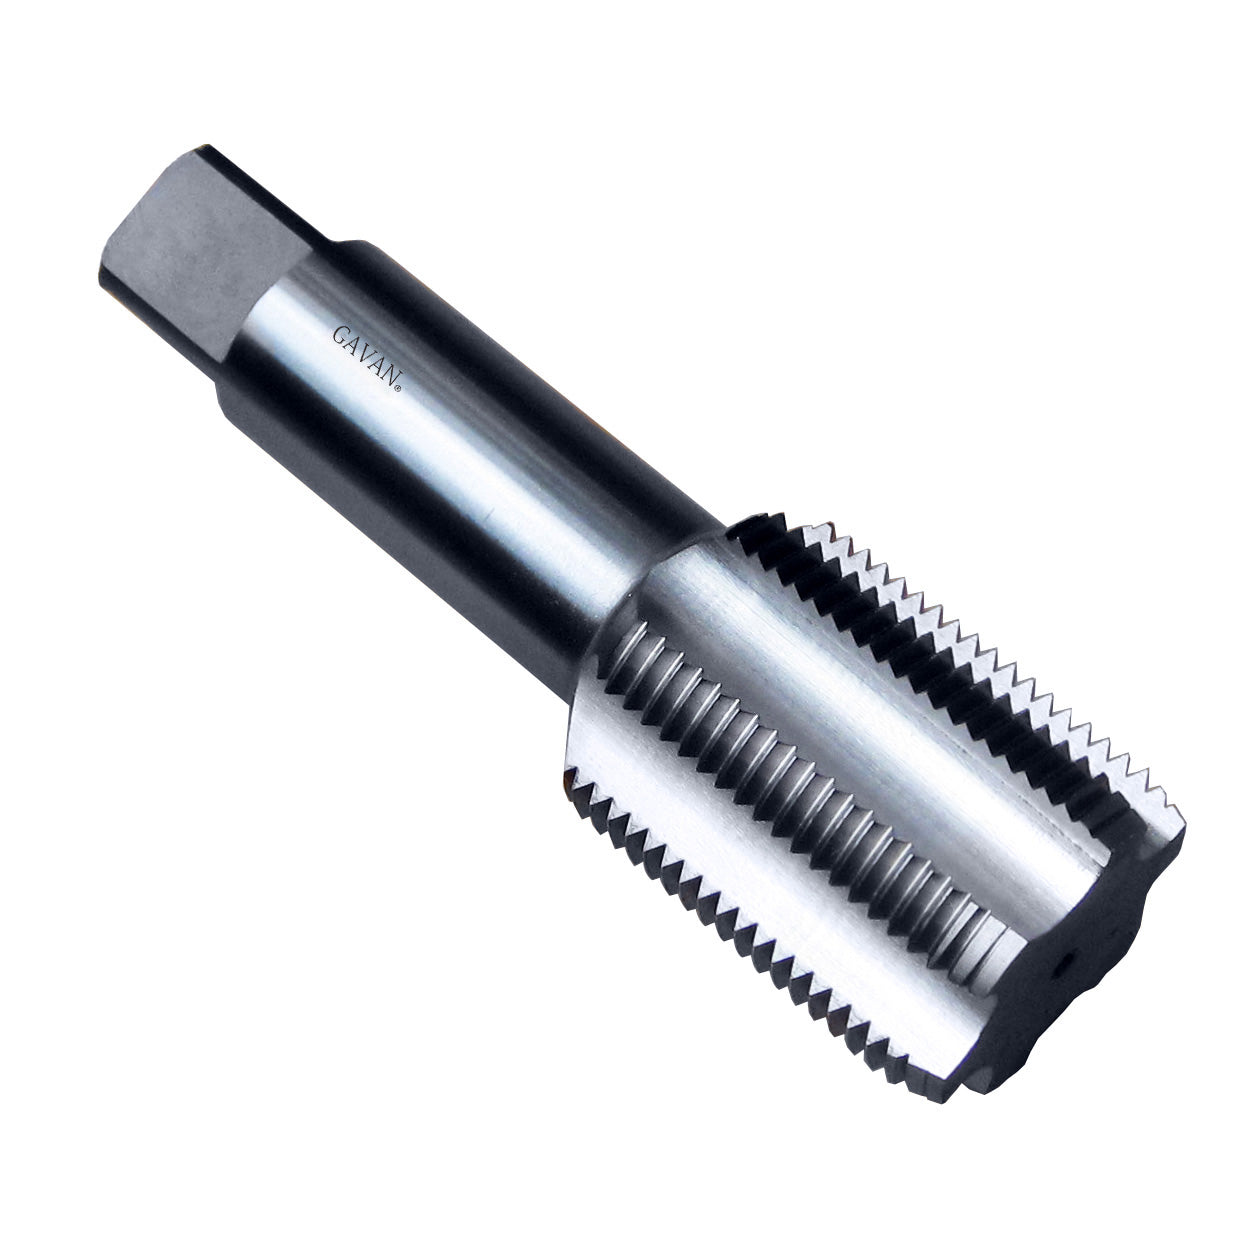 1 7/8" - 16 HSS Unified Right Hand Thread Tap